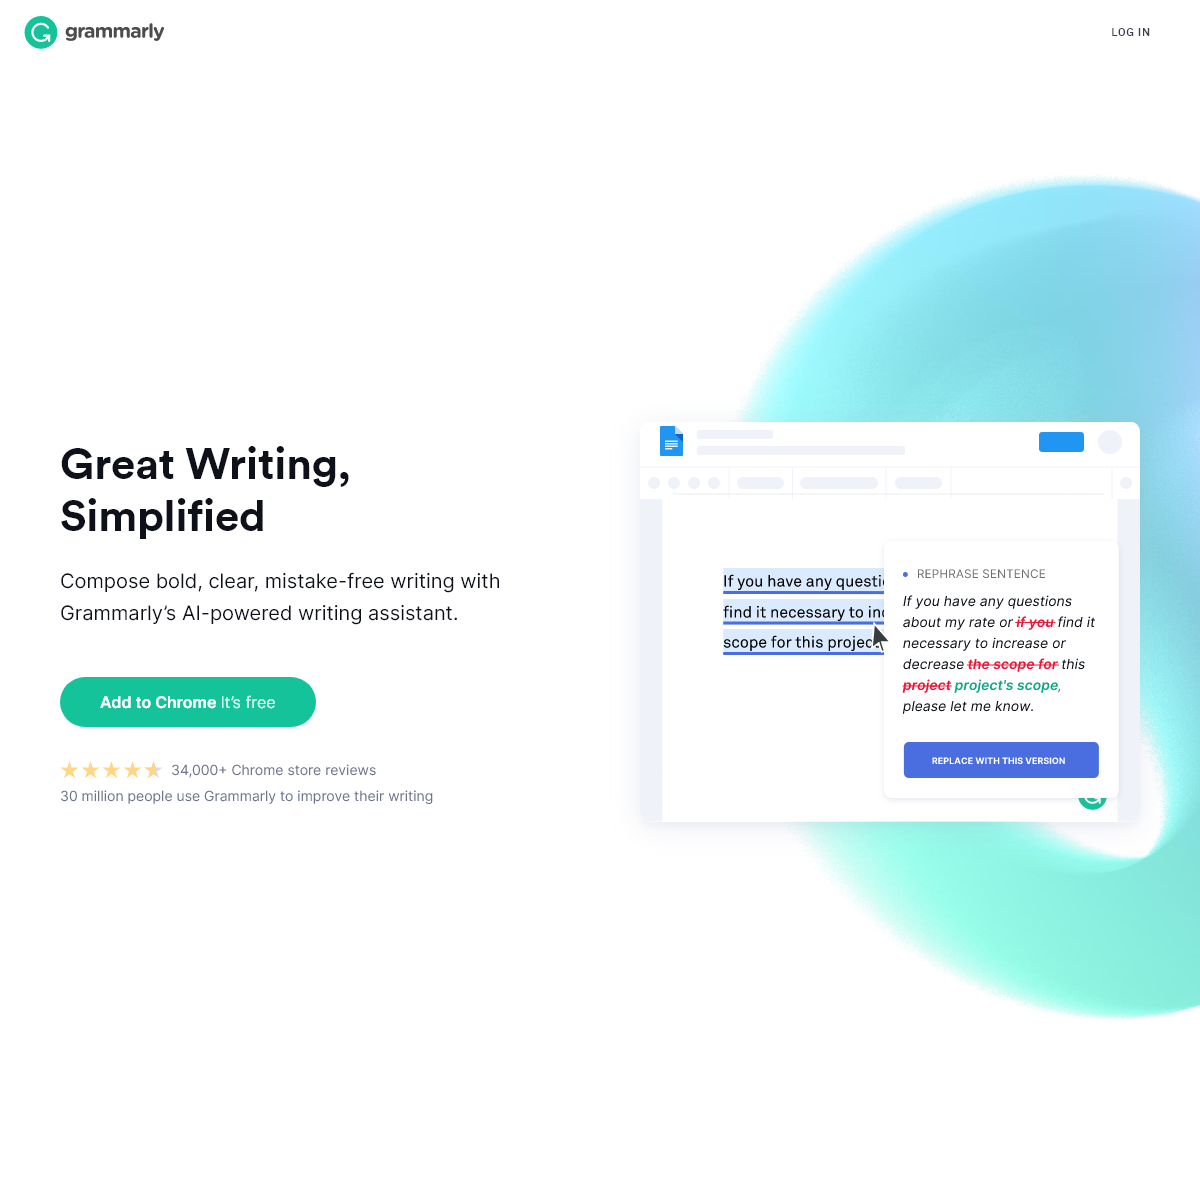 A complete backup of grammarly.com